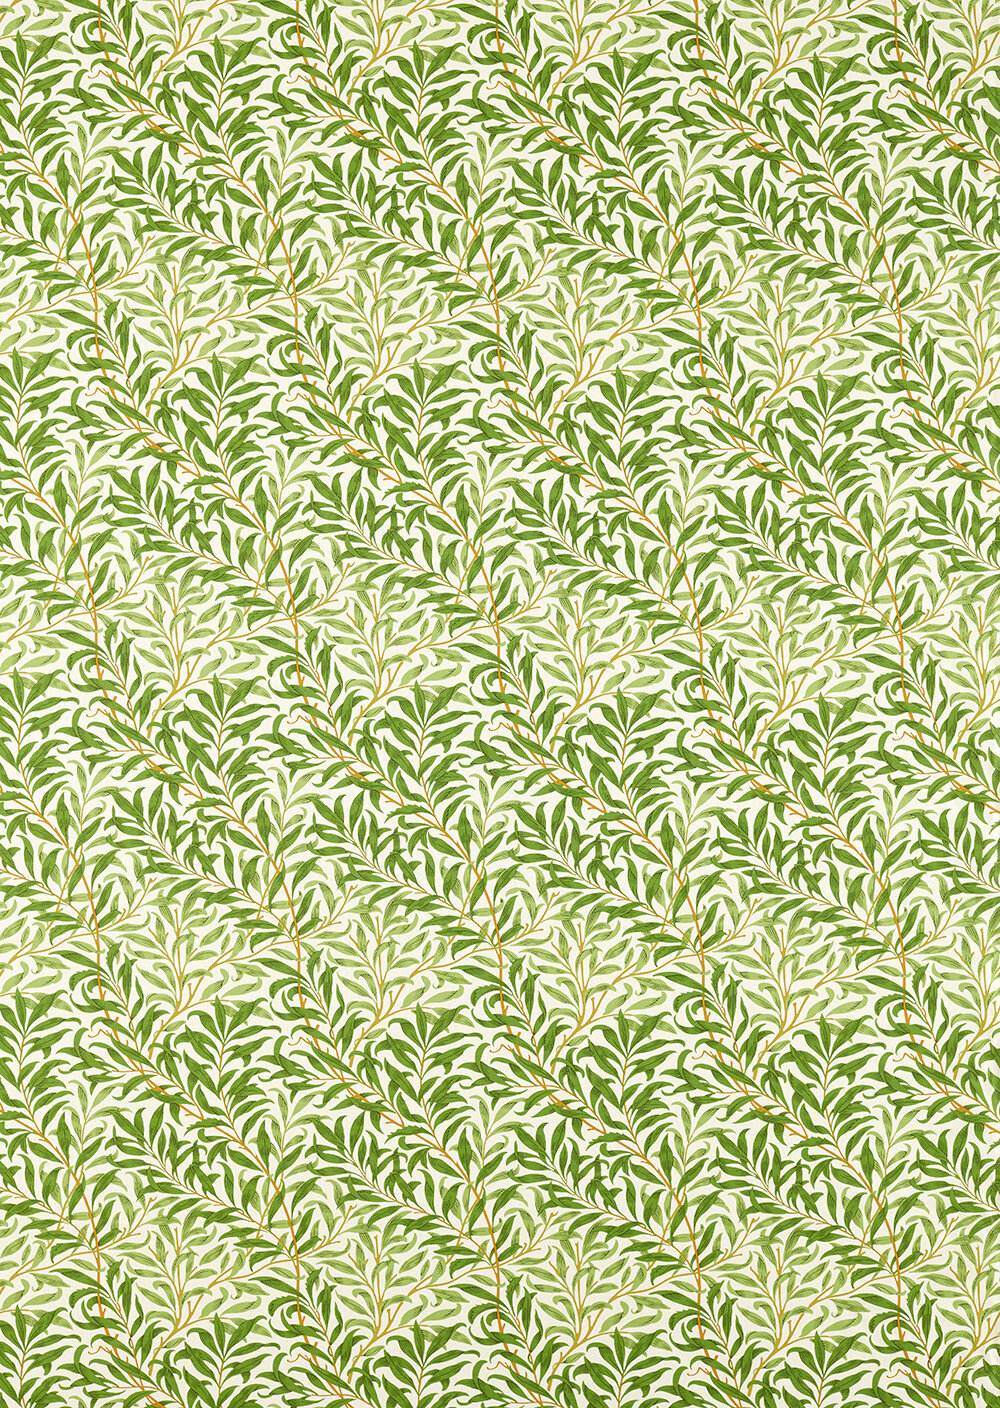 Willow Bough  Fabric - Leaf Green - by Morris